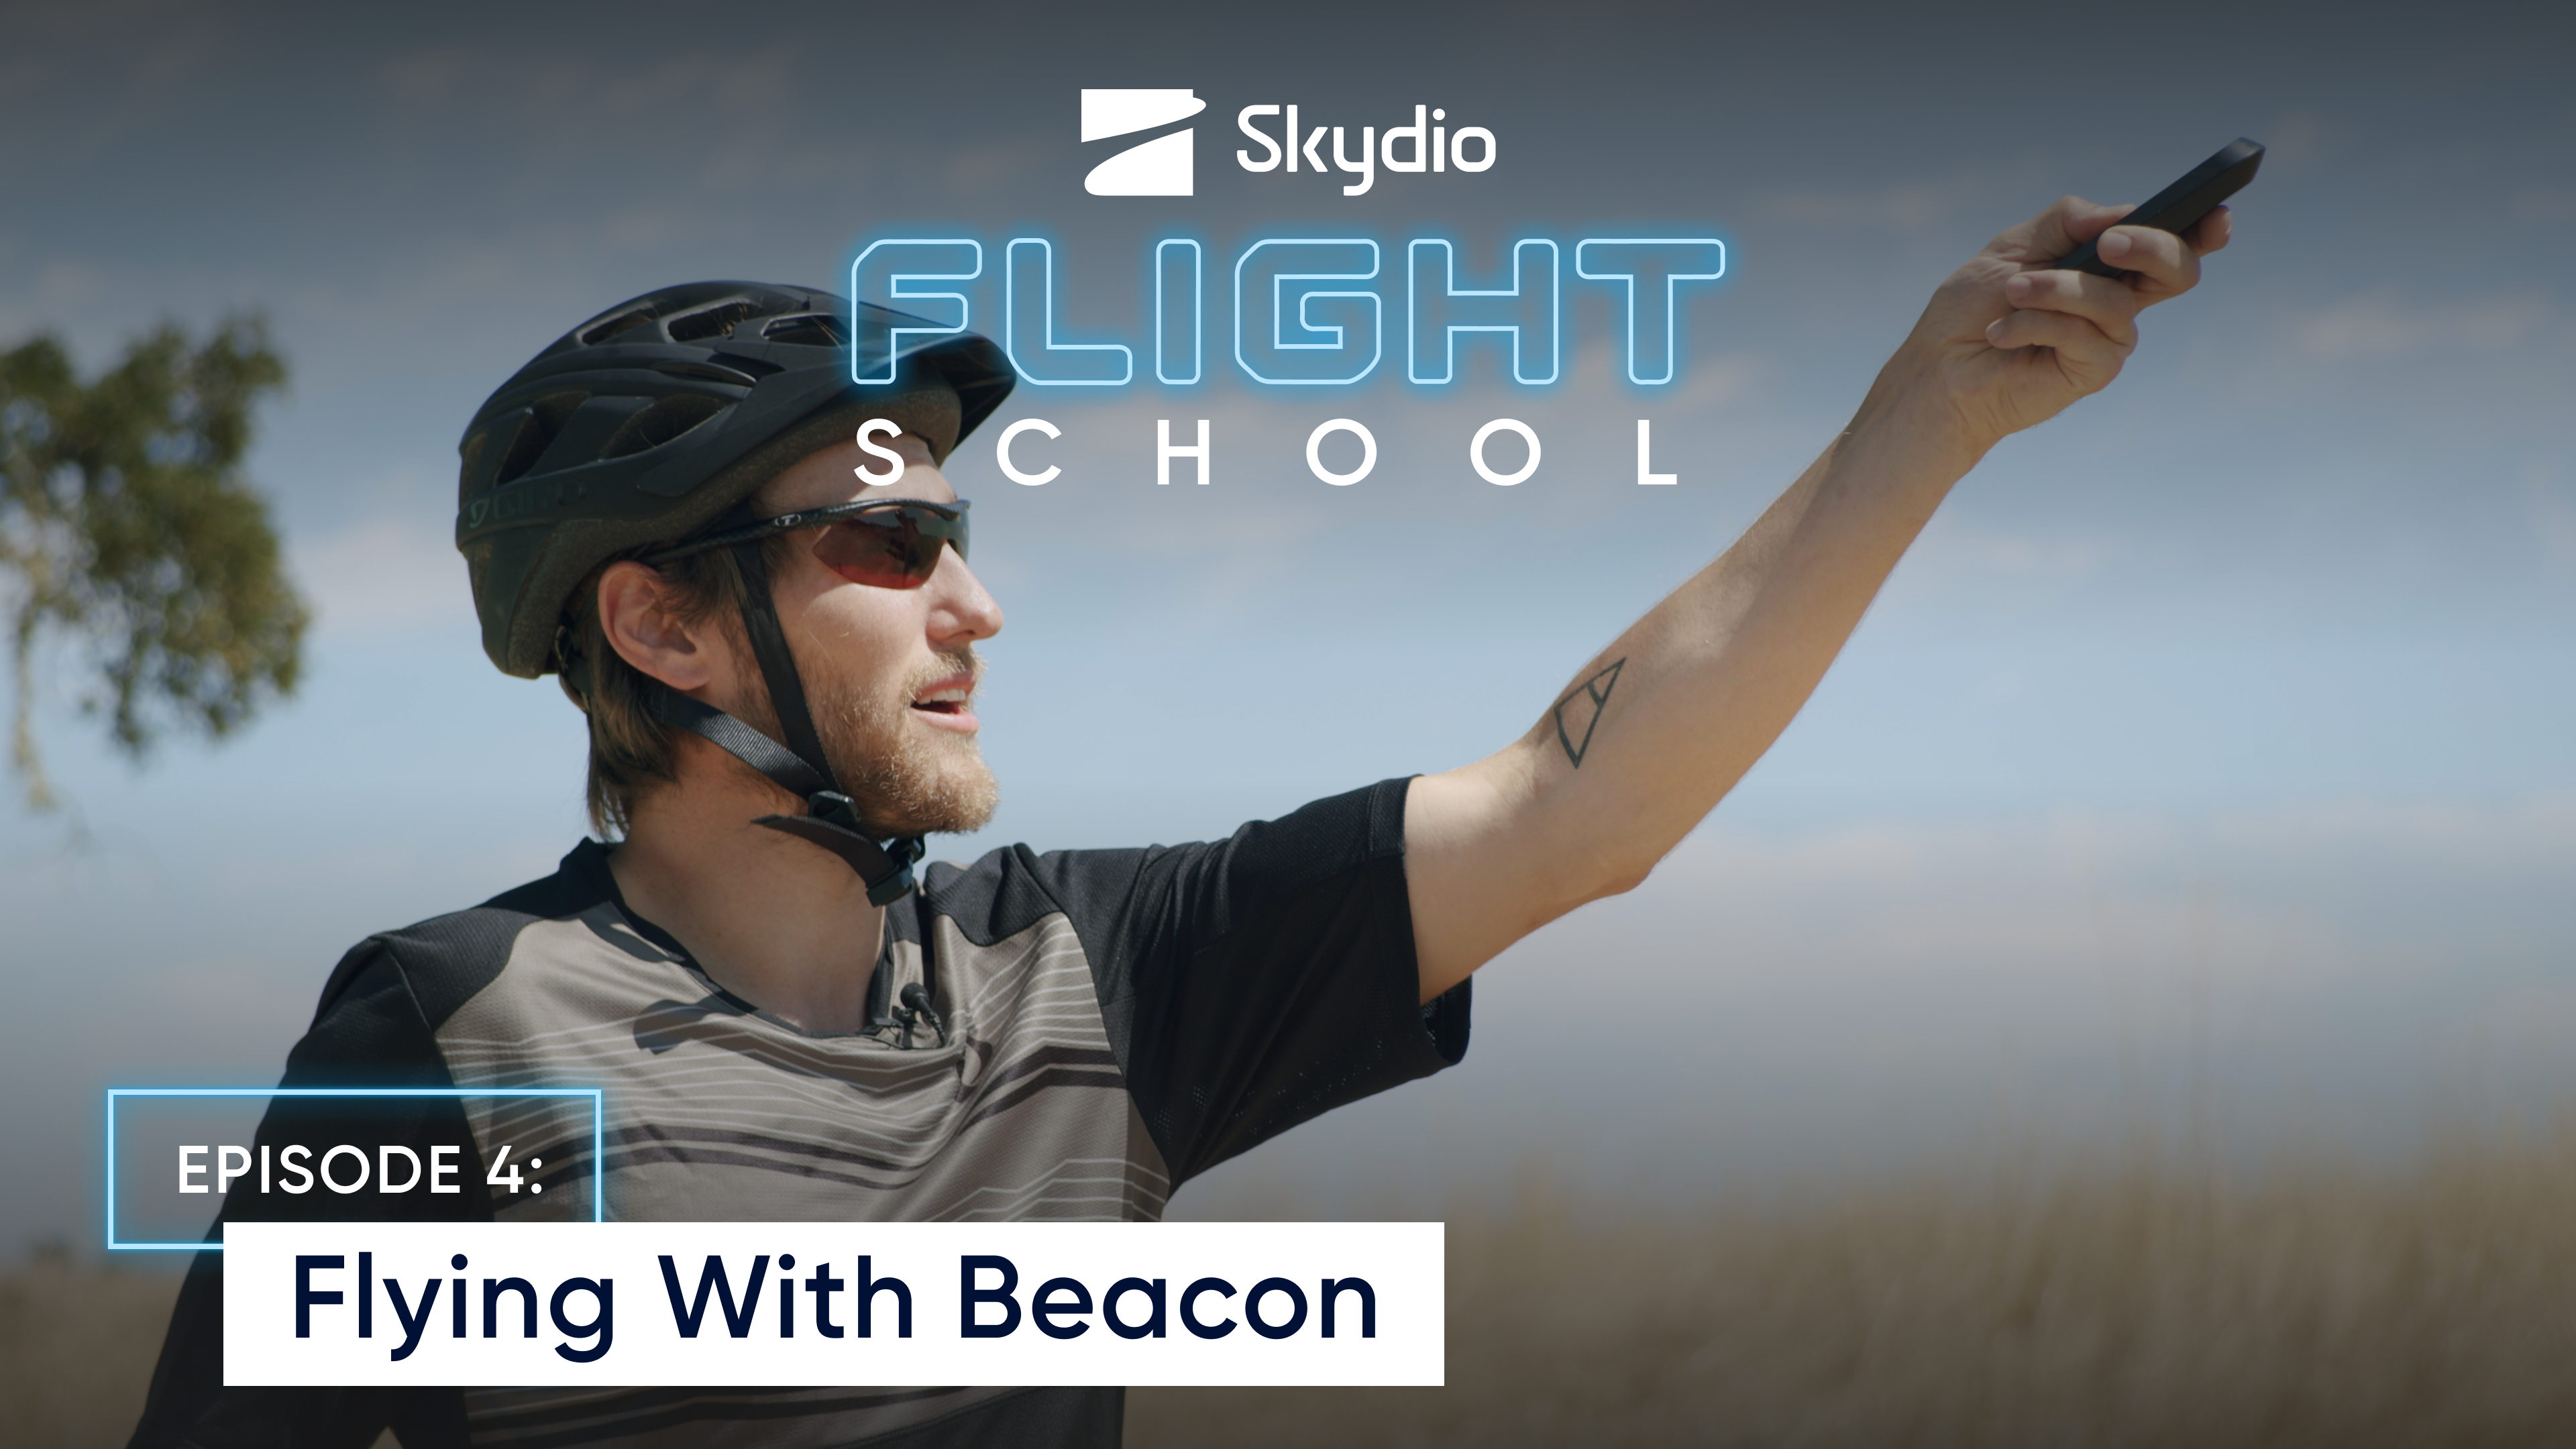 Flying with Beacon